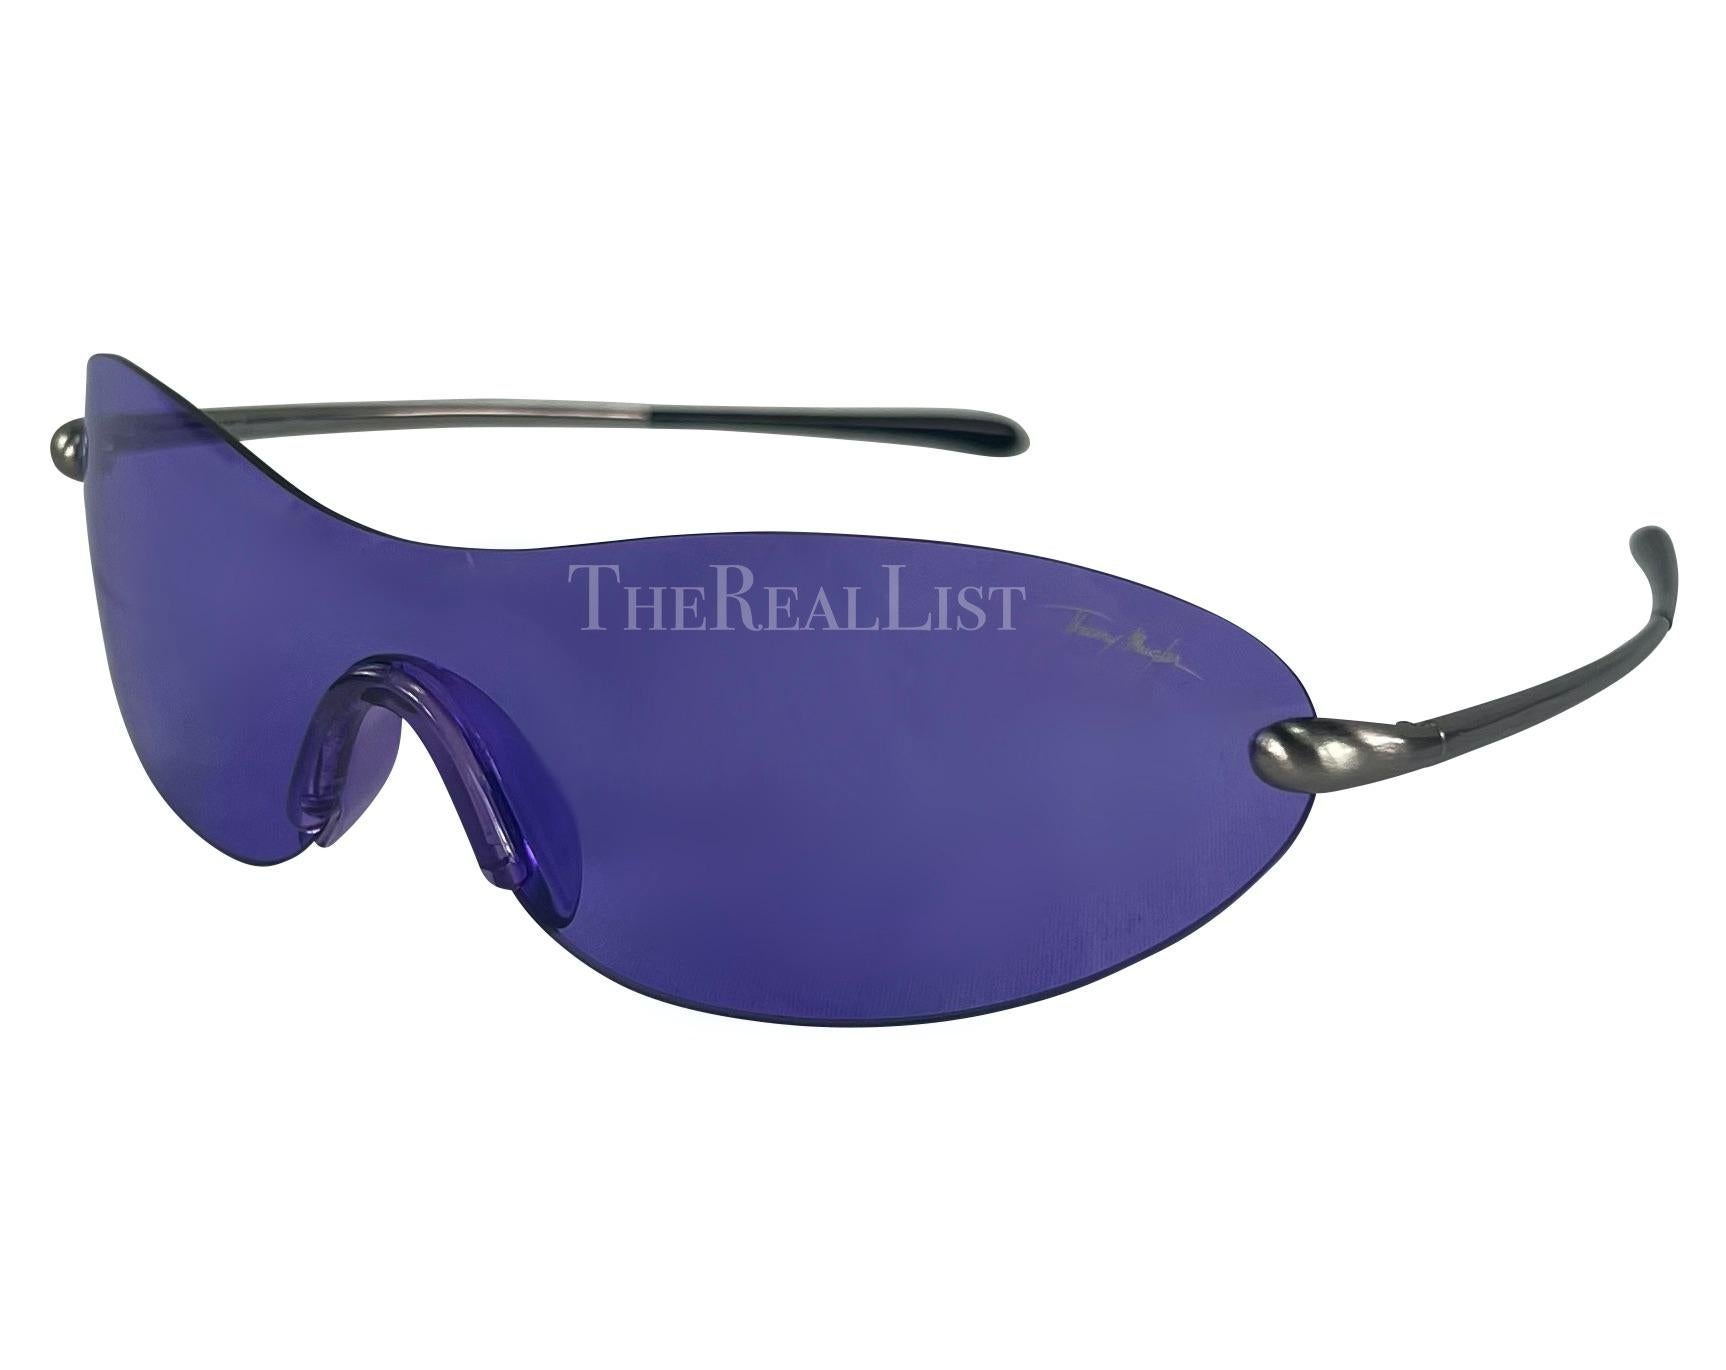 F/W 2001 Thierry Mugler Runway Purple Transparent Rimless Shield Sunglasses  In Excellent Condition For Sale In West Hollywood, CA